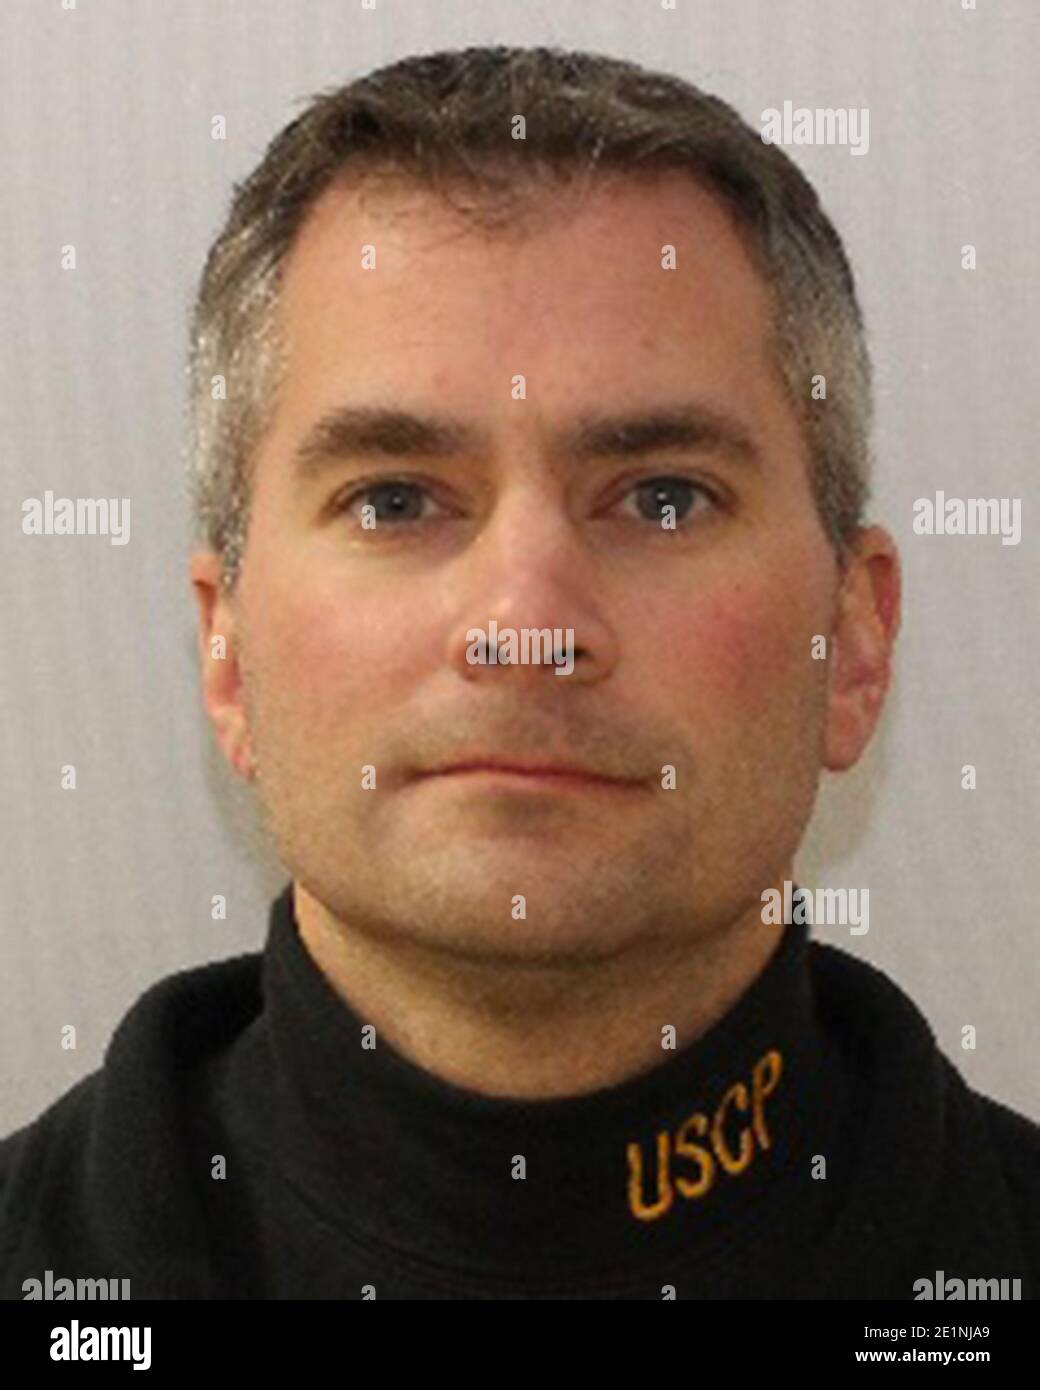 The United States Capitol Police announced that Officer Brian D. Sicknick passed away on January 7, 2021, due to injuries sustained while physically engaging with protesters during the riots over the presidential election certification on January 6, 2021, at the U.S. Capitol. Officer Sicknick returned to his division office and collapsed before being taken to a local hospital, where he succumbed to his injuries. Credit: UPI/Alamy Live News Stock Photo